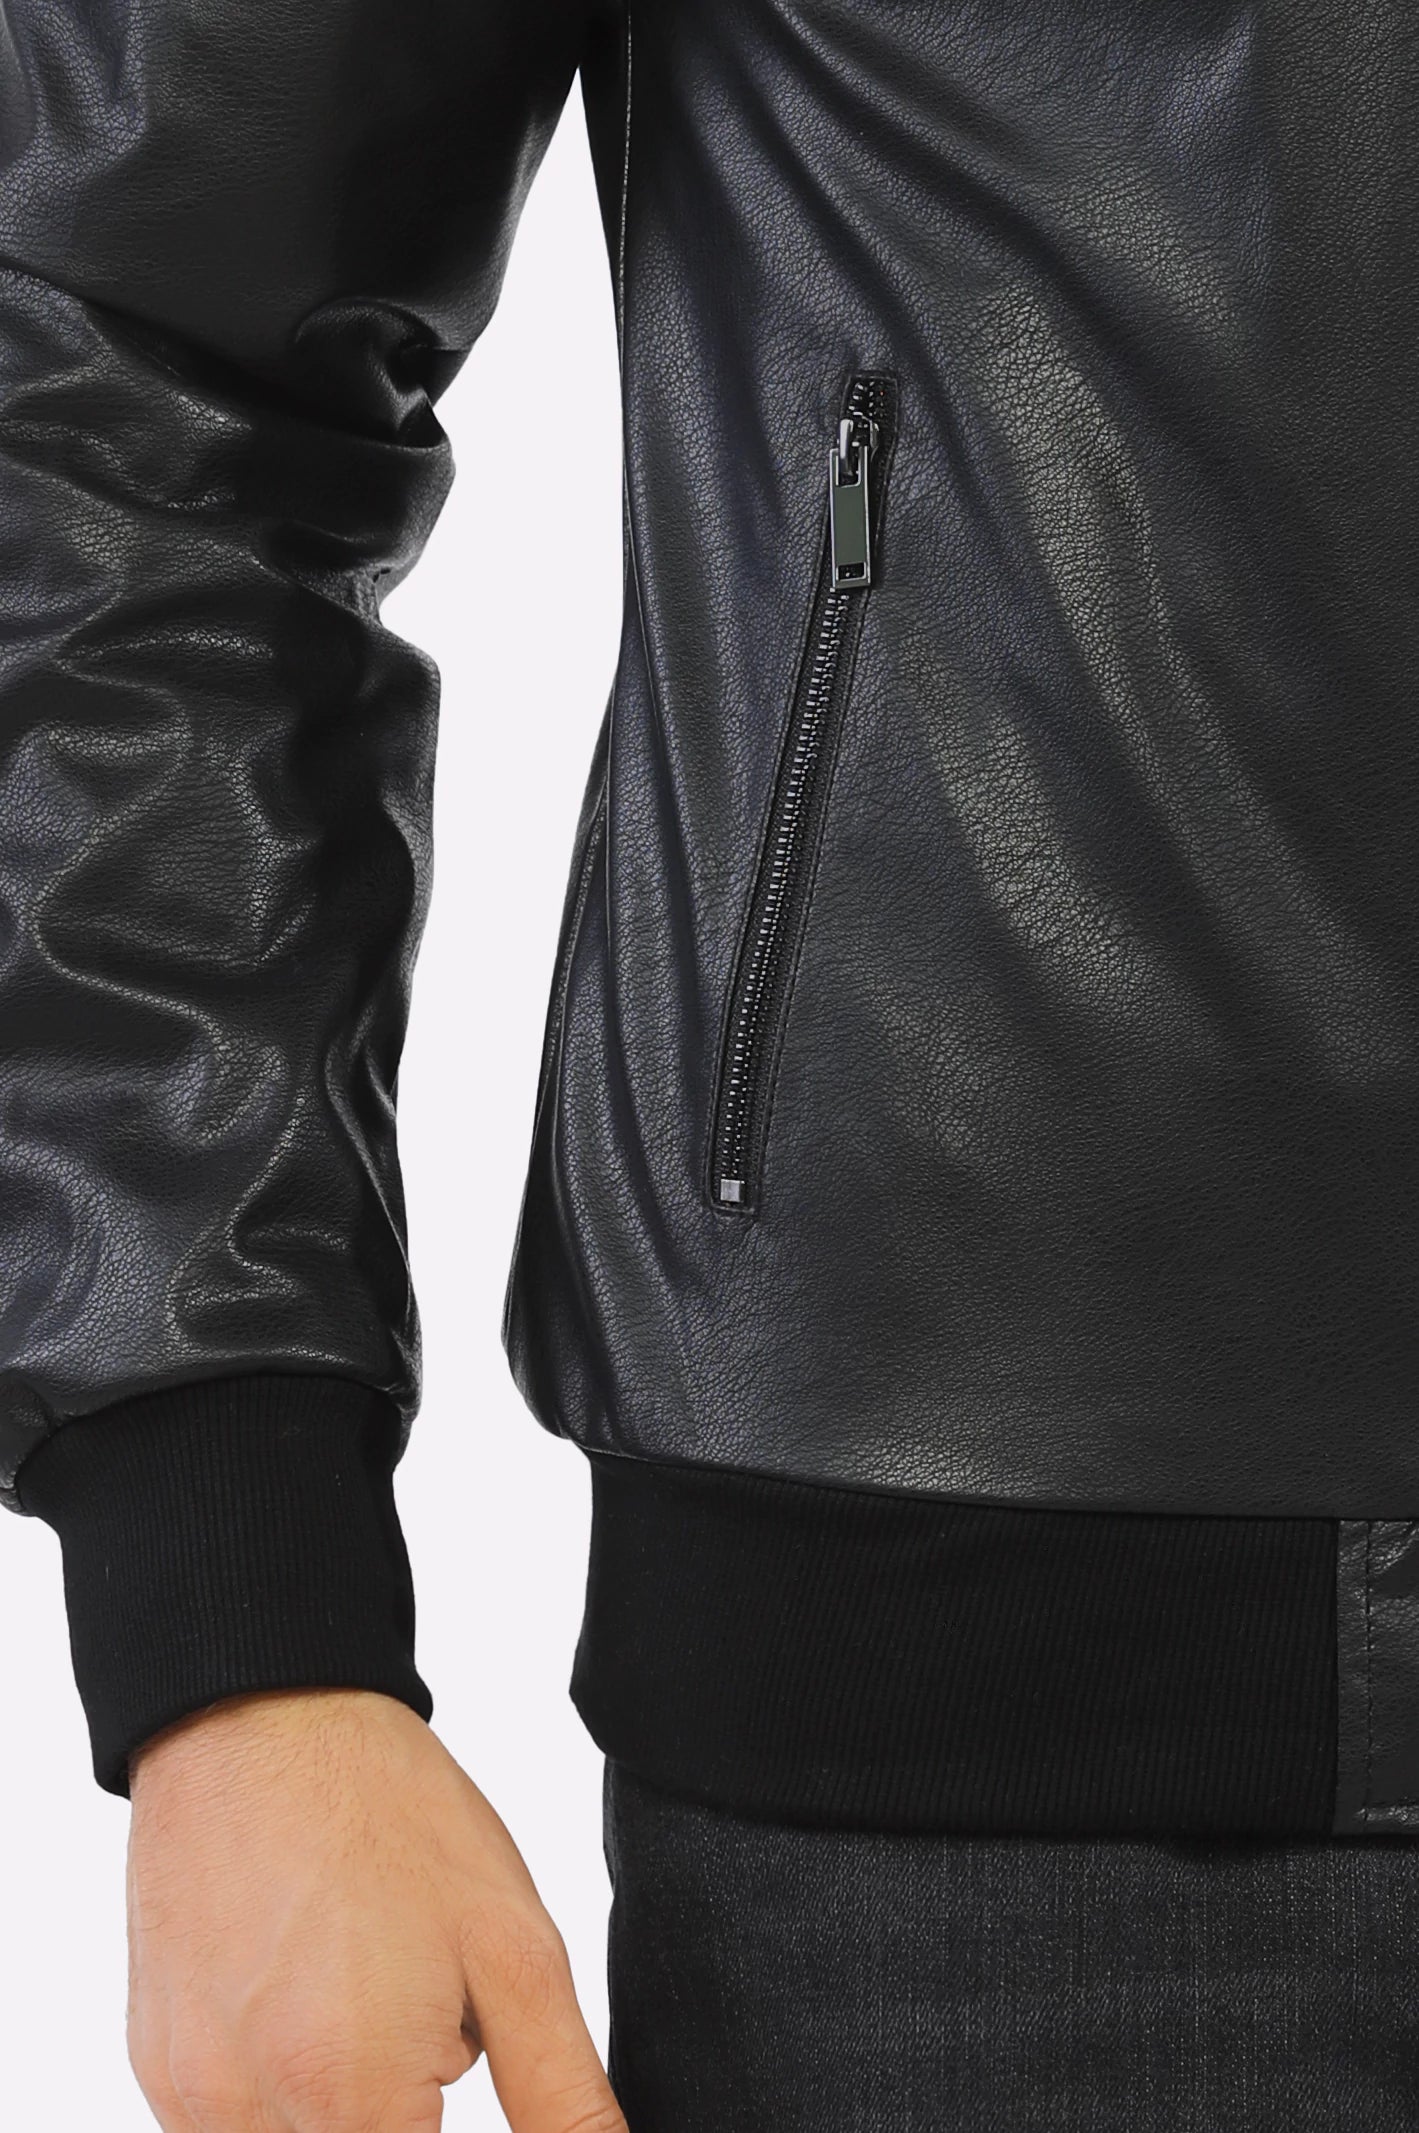 Mens Black Leather Jacket with Hood